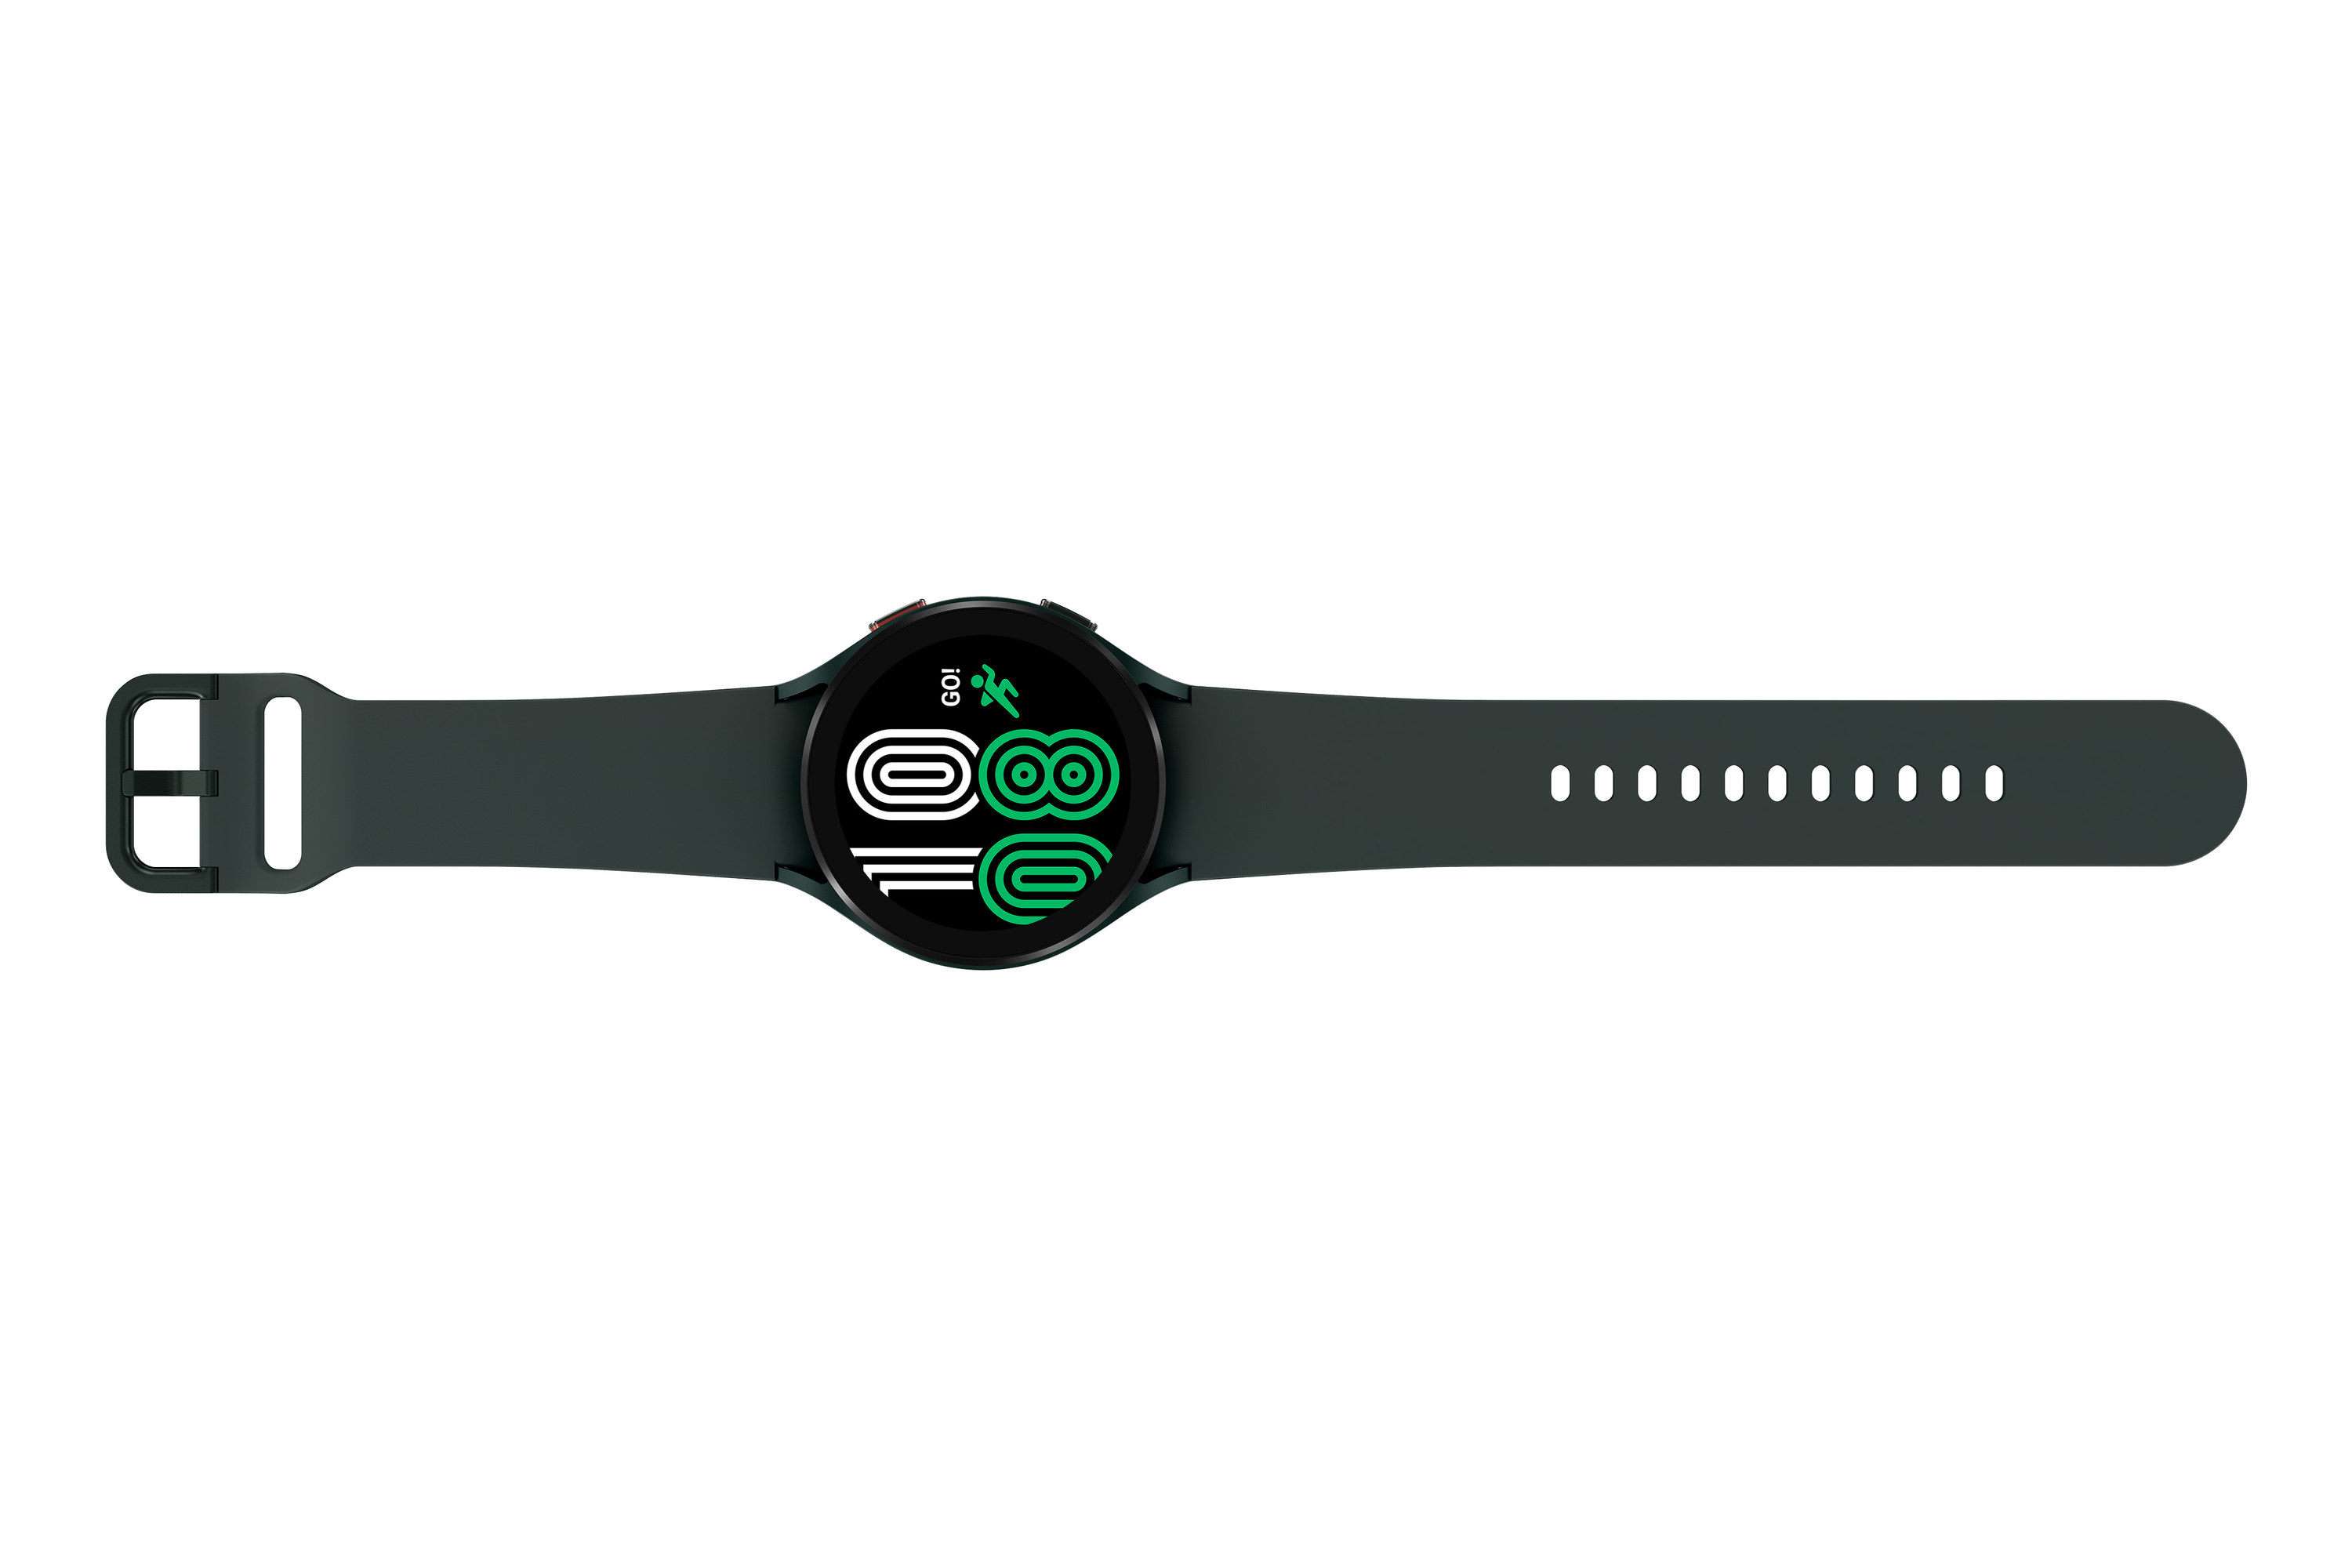 Product image of green Galaxy Watch4 laid out horizontally